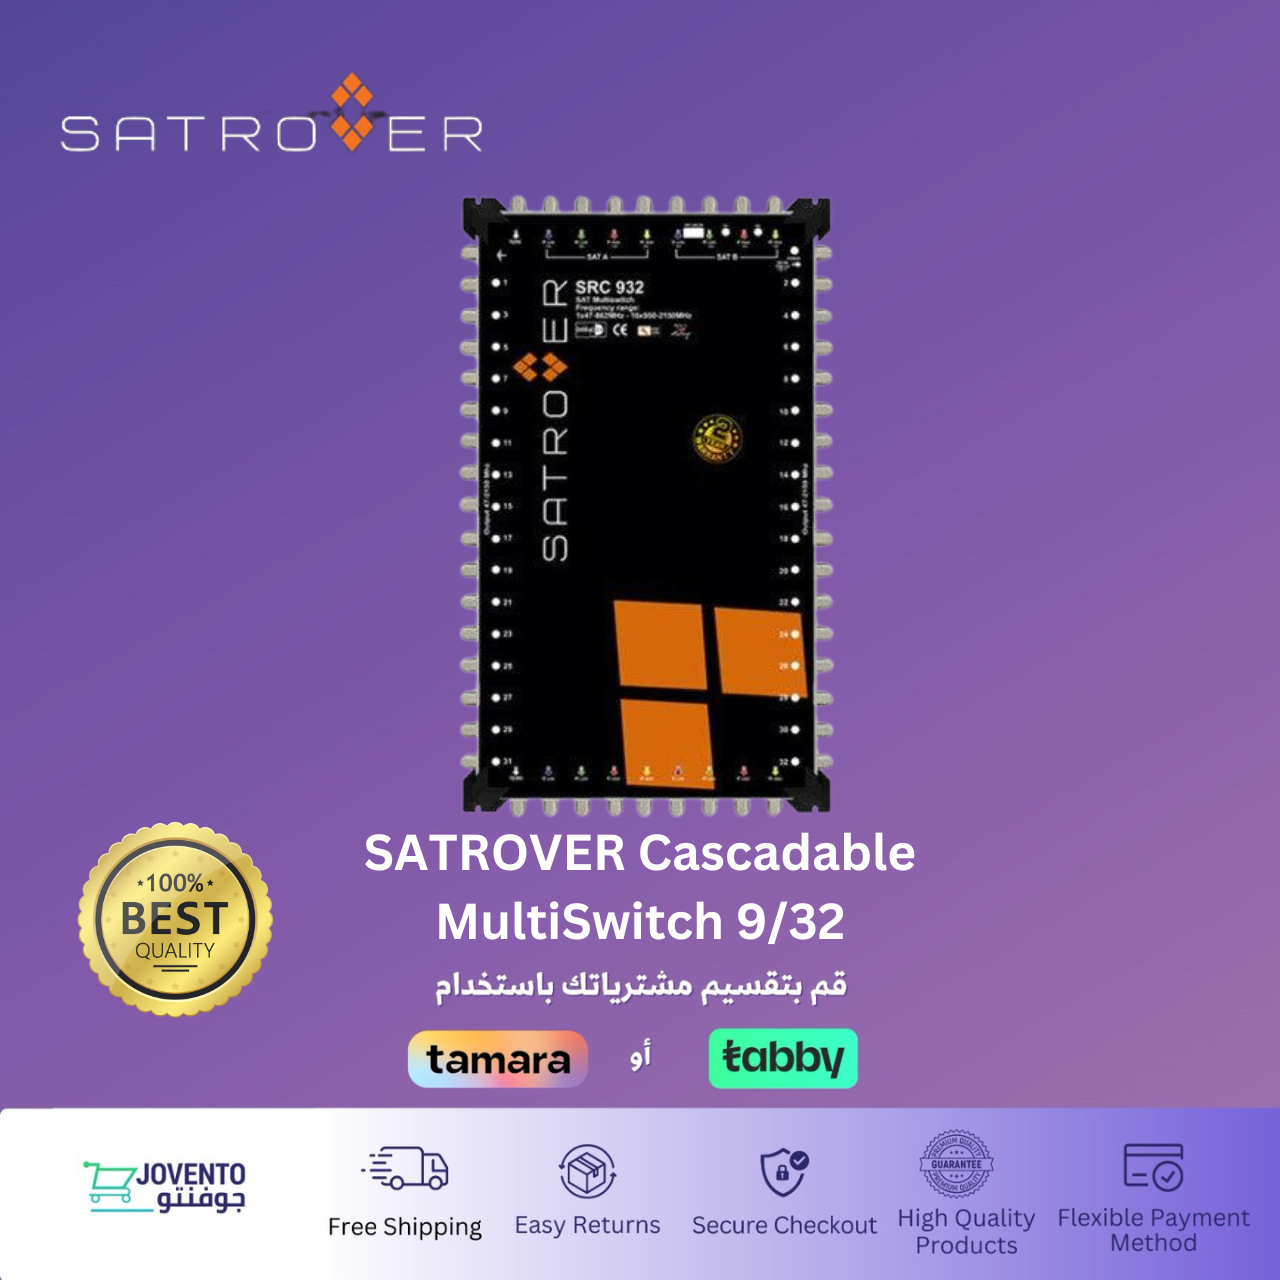 SATROVER Cascadable MultiSwitch 9/32